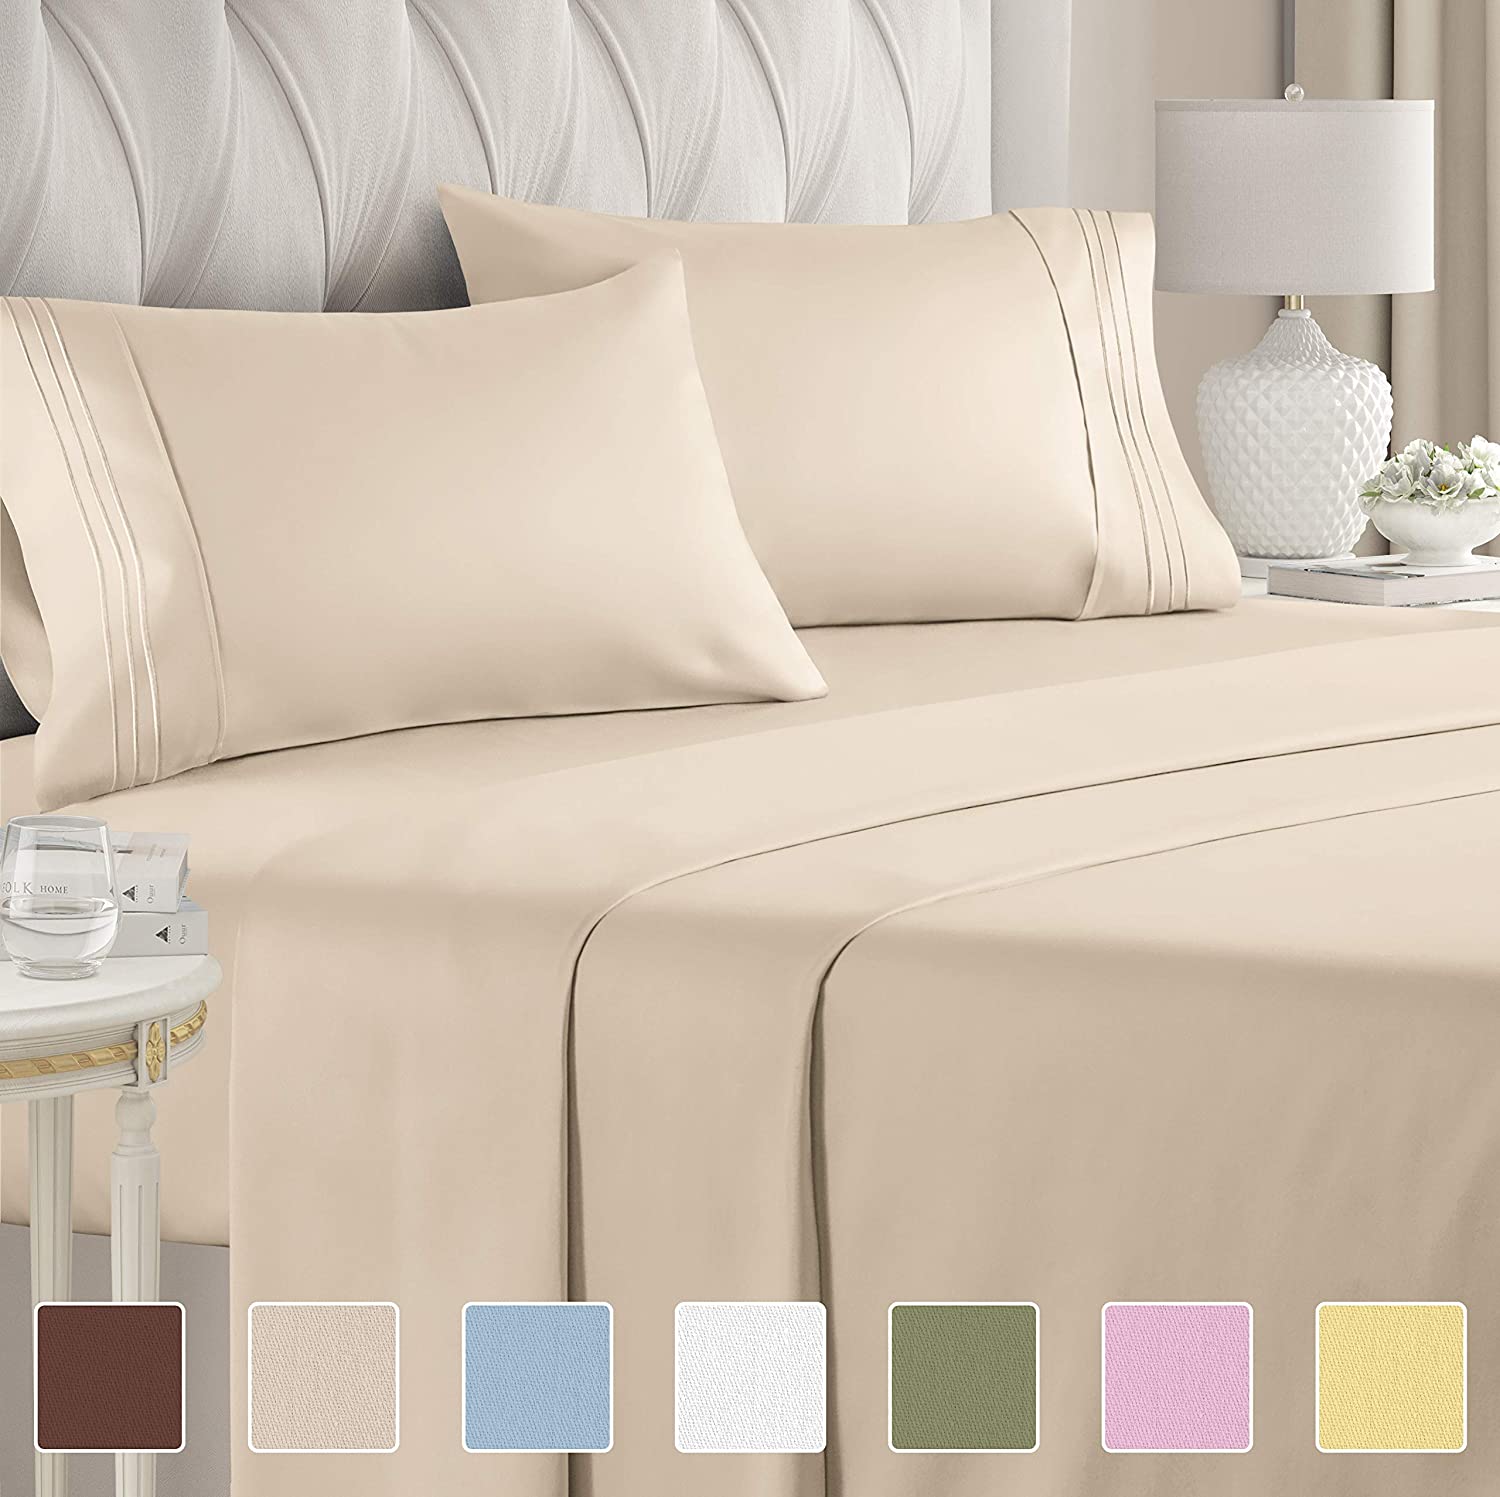 The Best Luxury California King Sheets, Cal King Sheets On King Bed